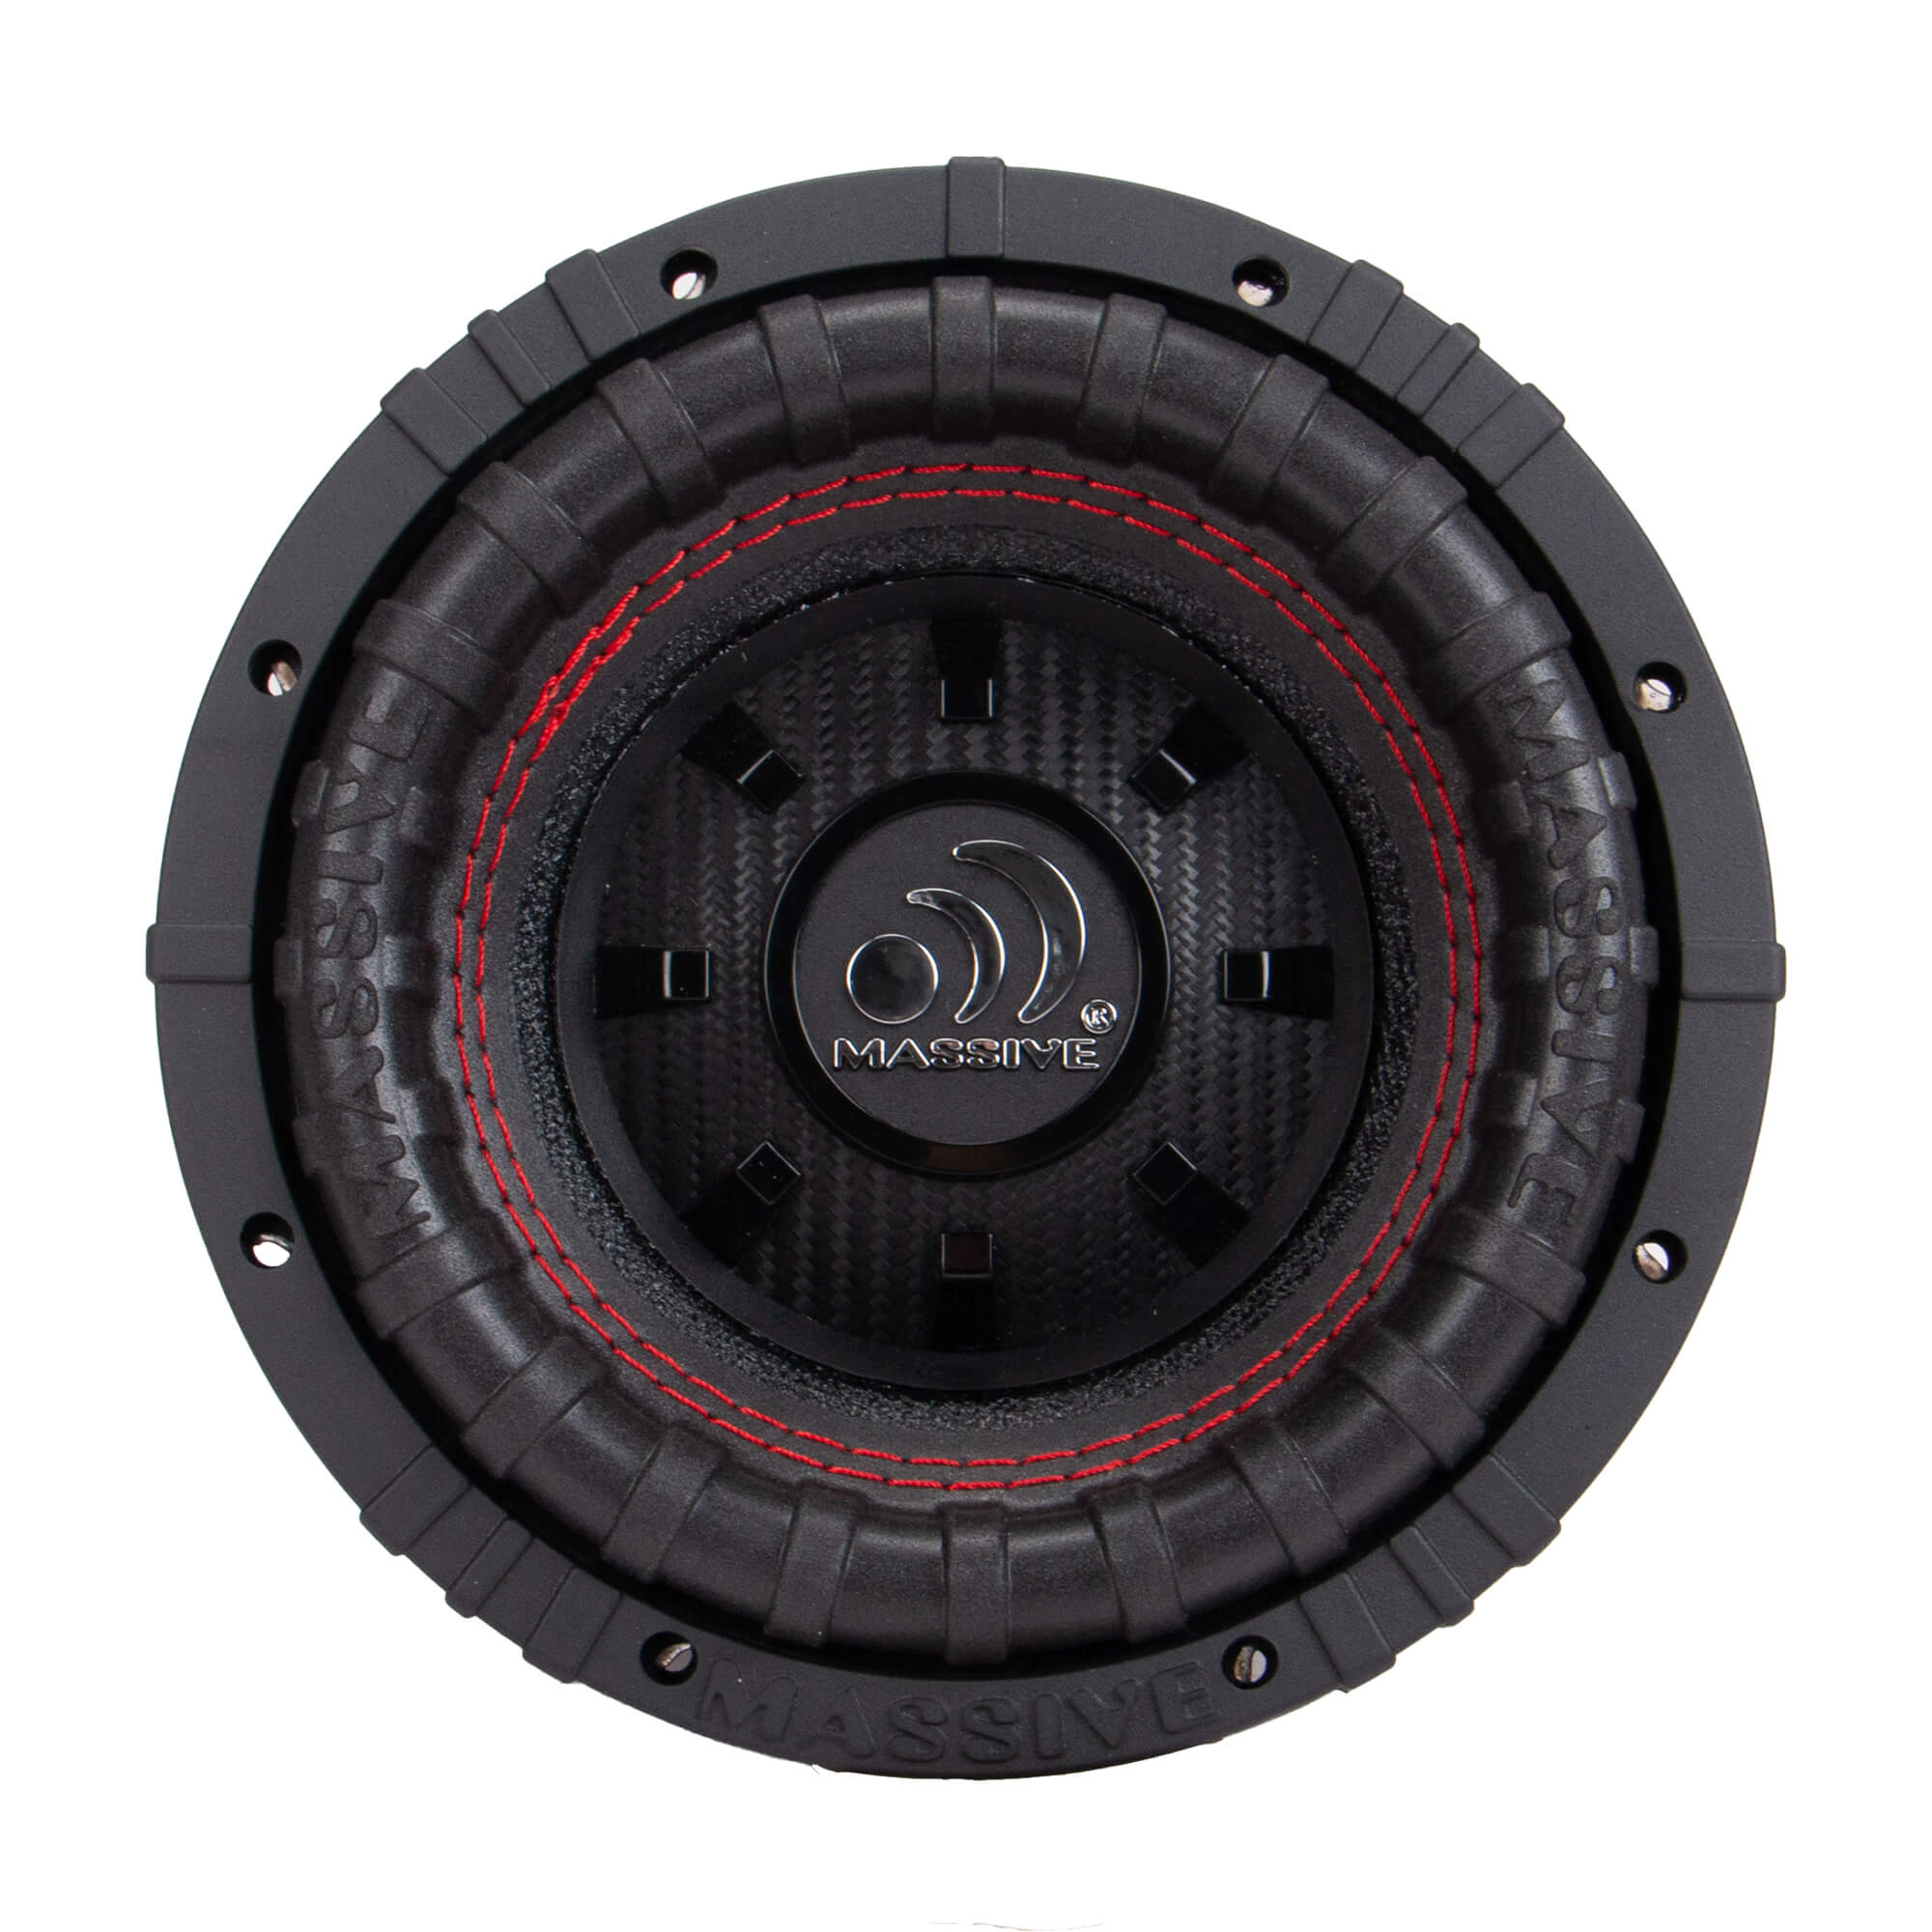 GTR64 - 6.5" 400 Watts RMS Dual 4 Ohm Subwoofer